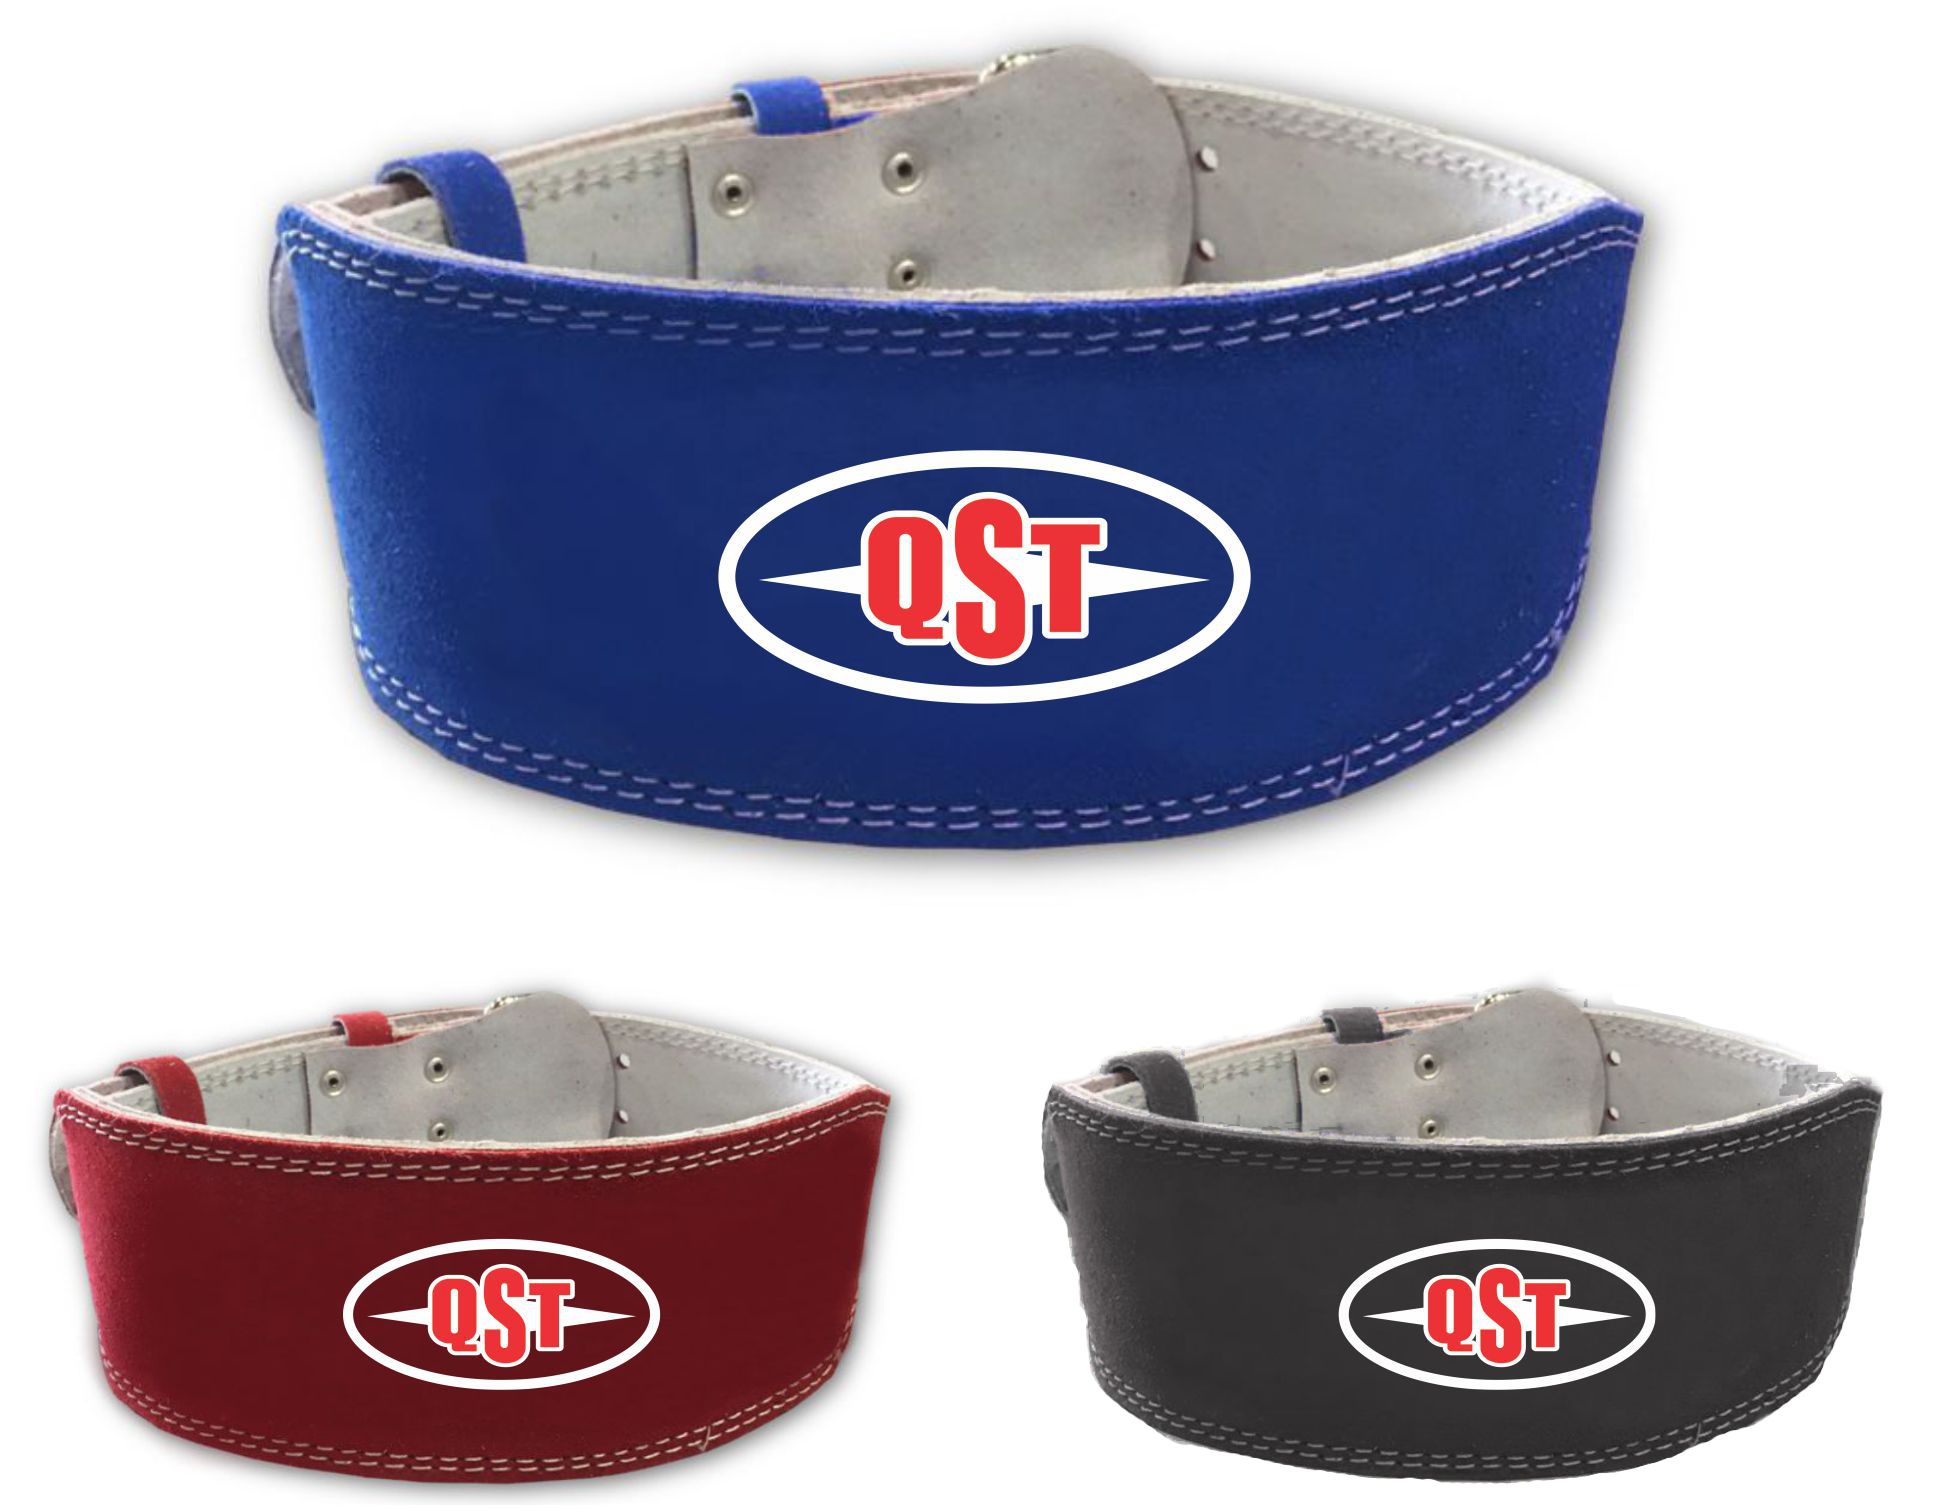 Leather Weightlifting Belt - ACS-1541